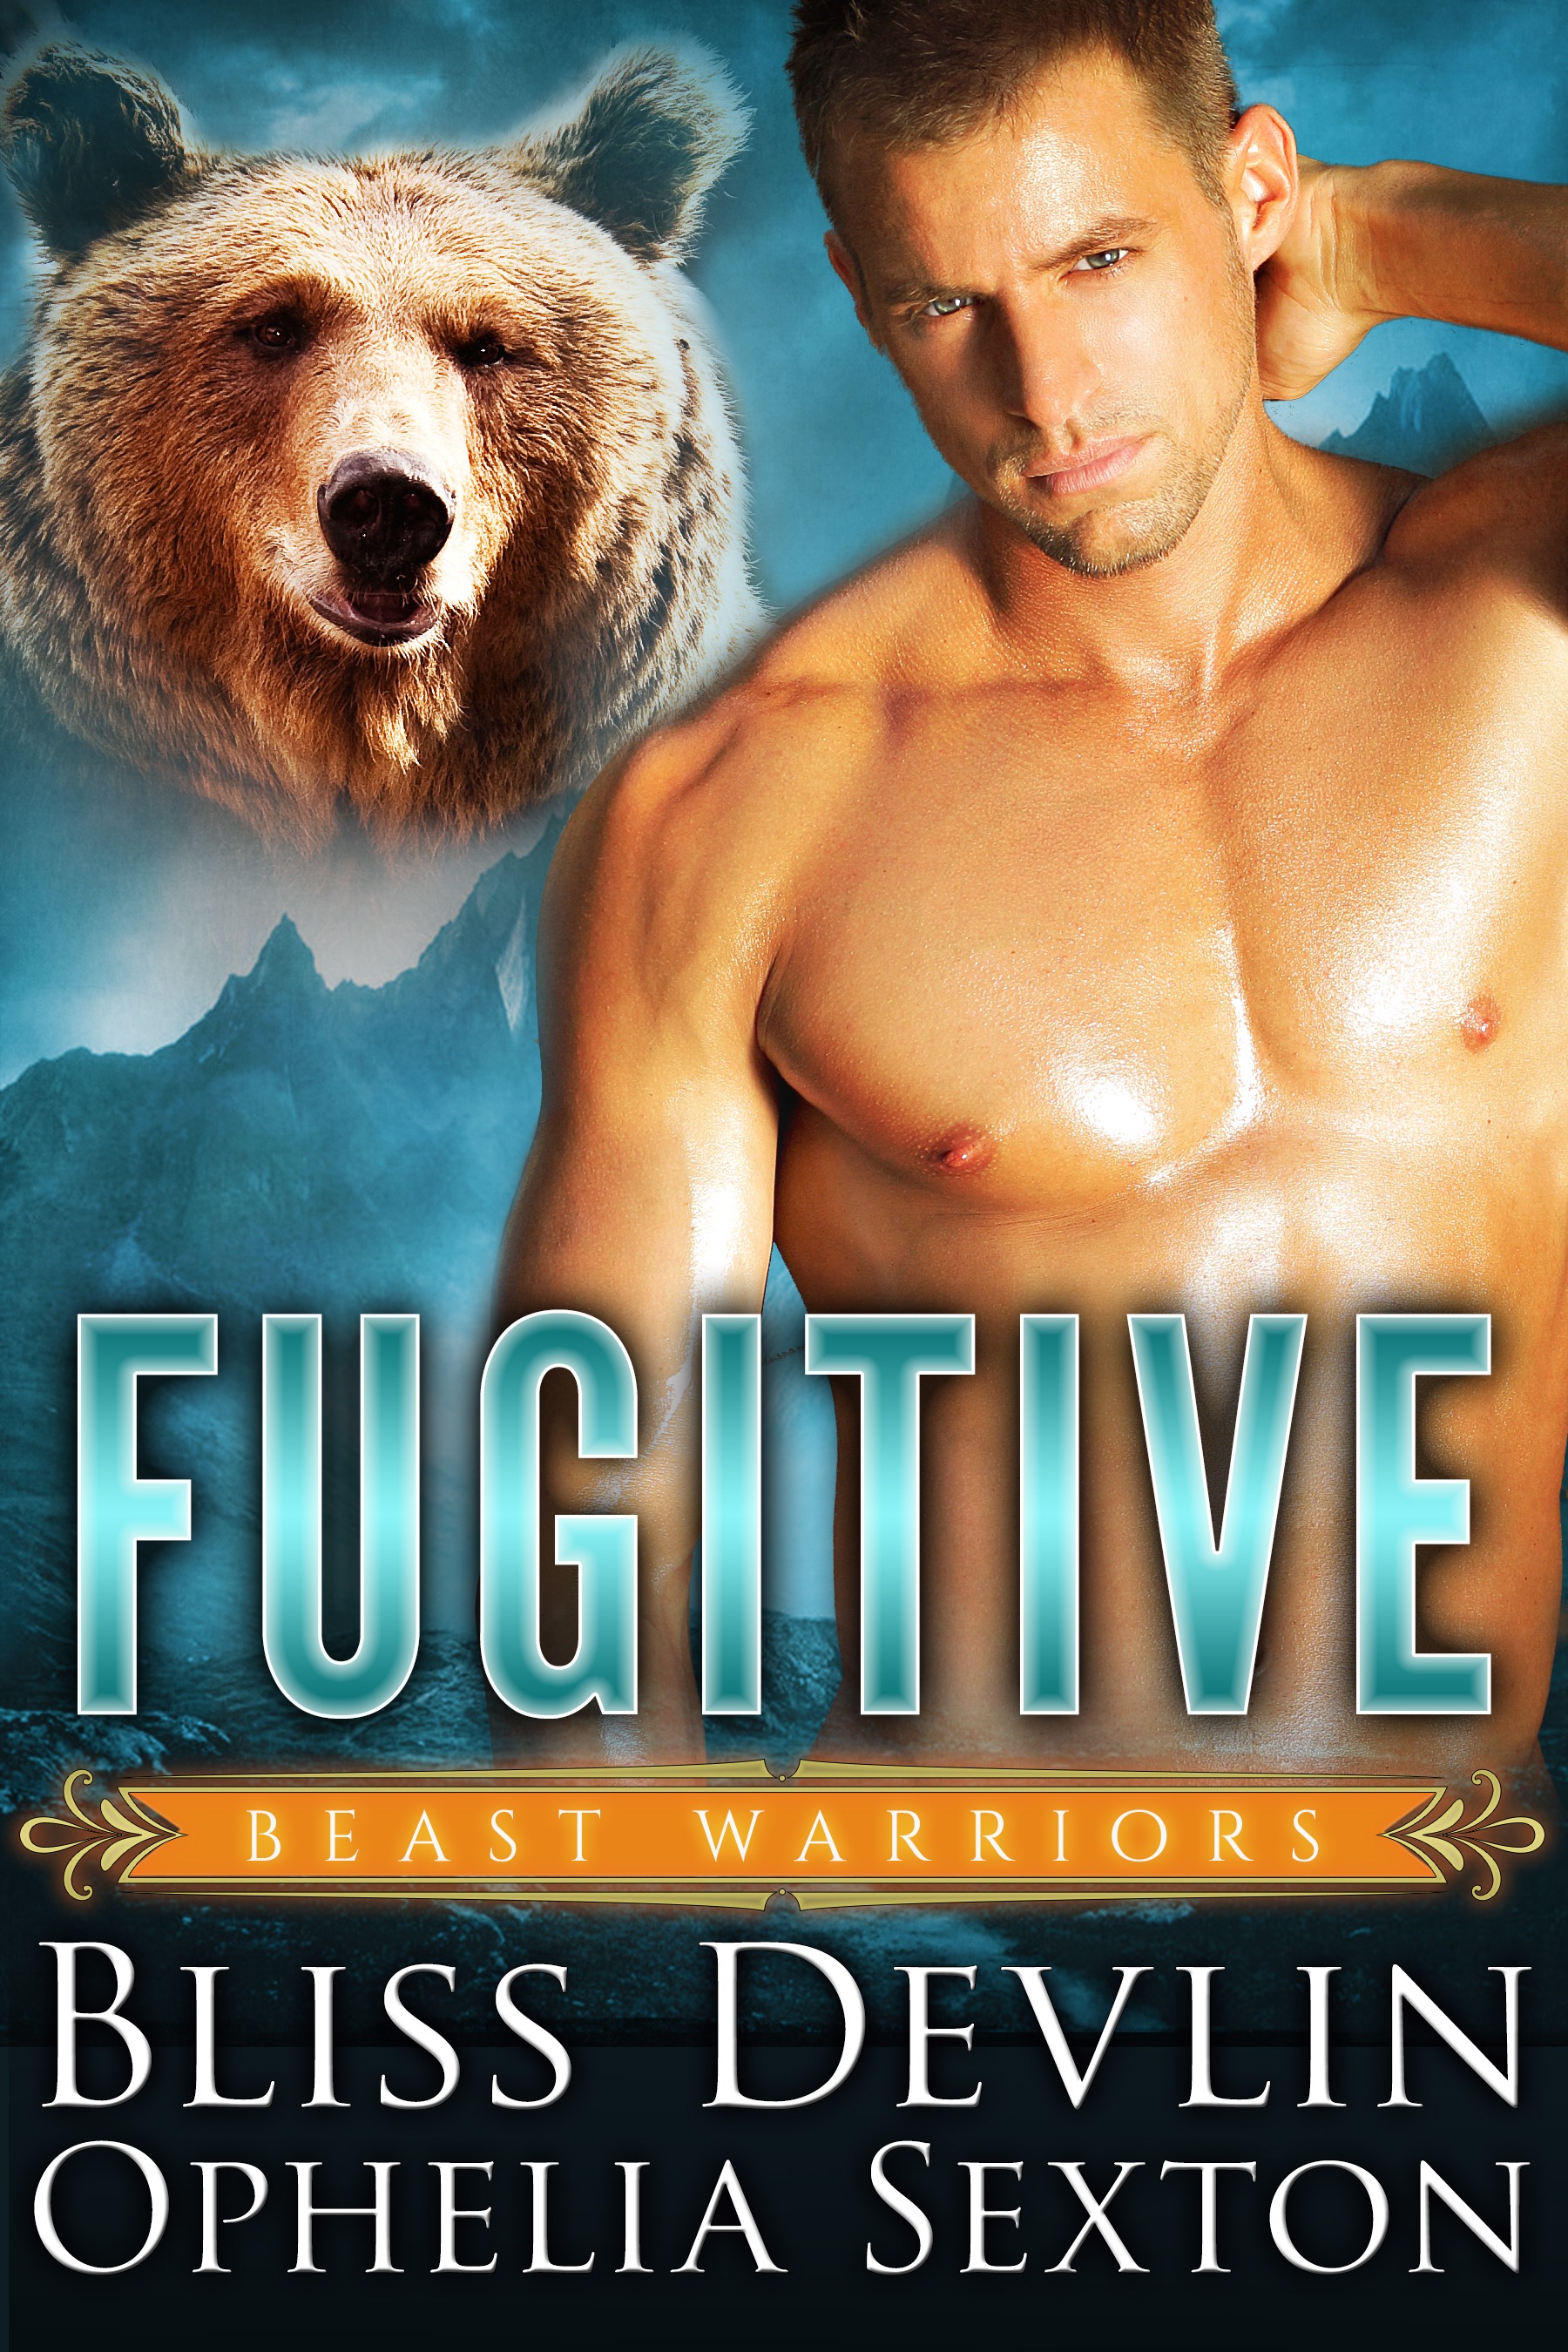 Fugitive by Bliss Devlin and Ophelia Sexton